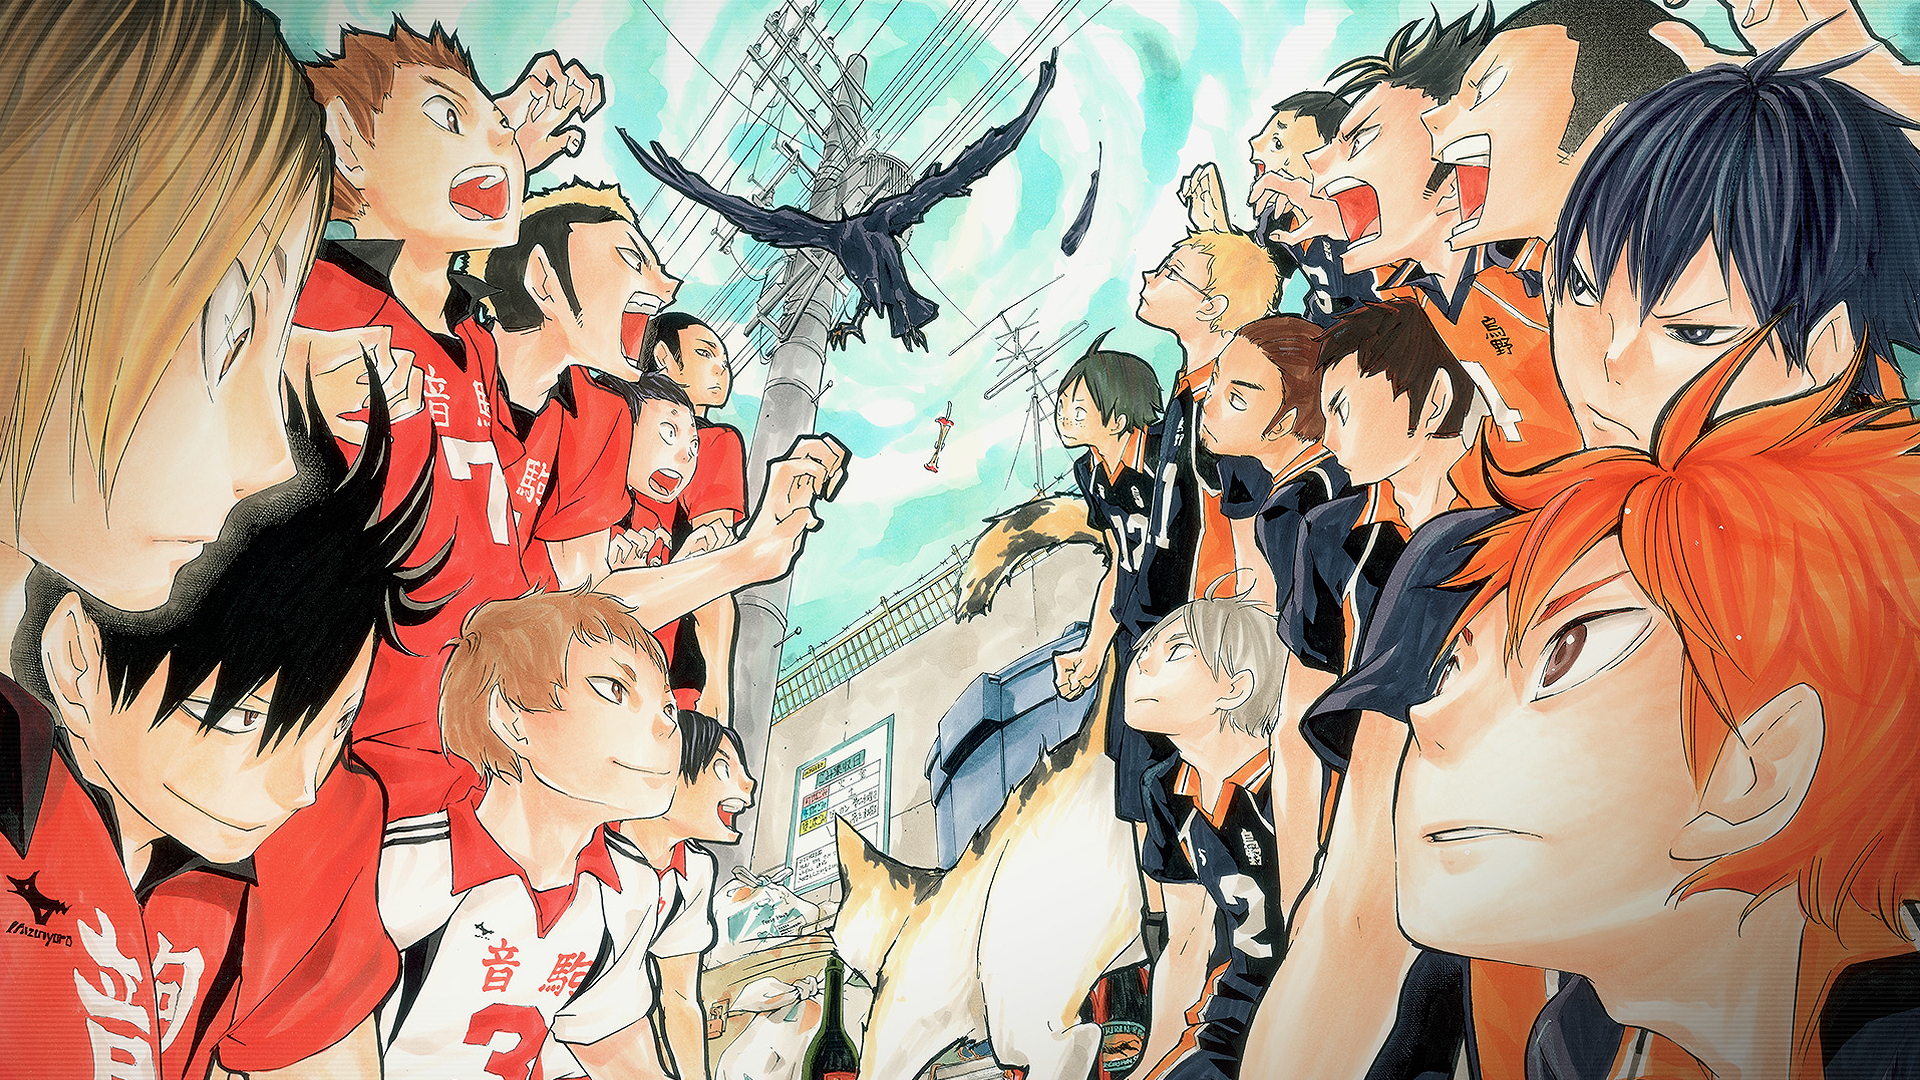 HD wallpaper featuring intense standoff between Karasuno High and Nekoma High volleyball teams from the anime Haikyū!!, created by Haruichi Furudate.